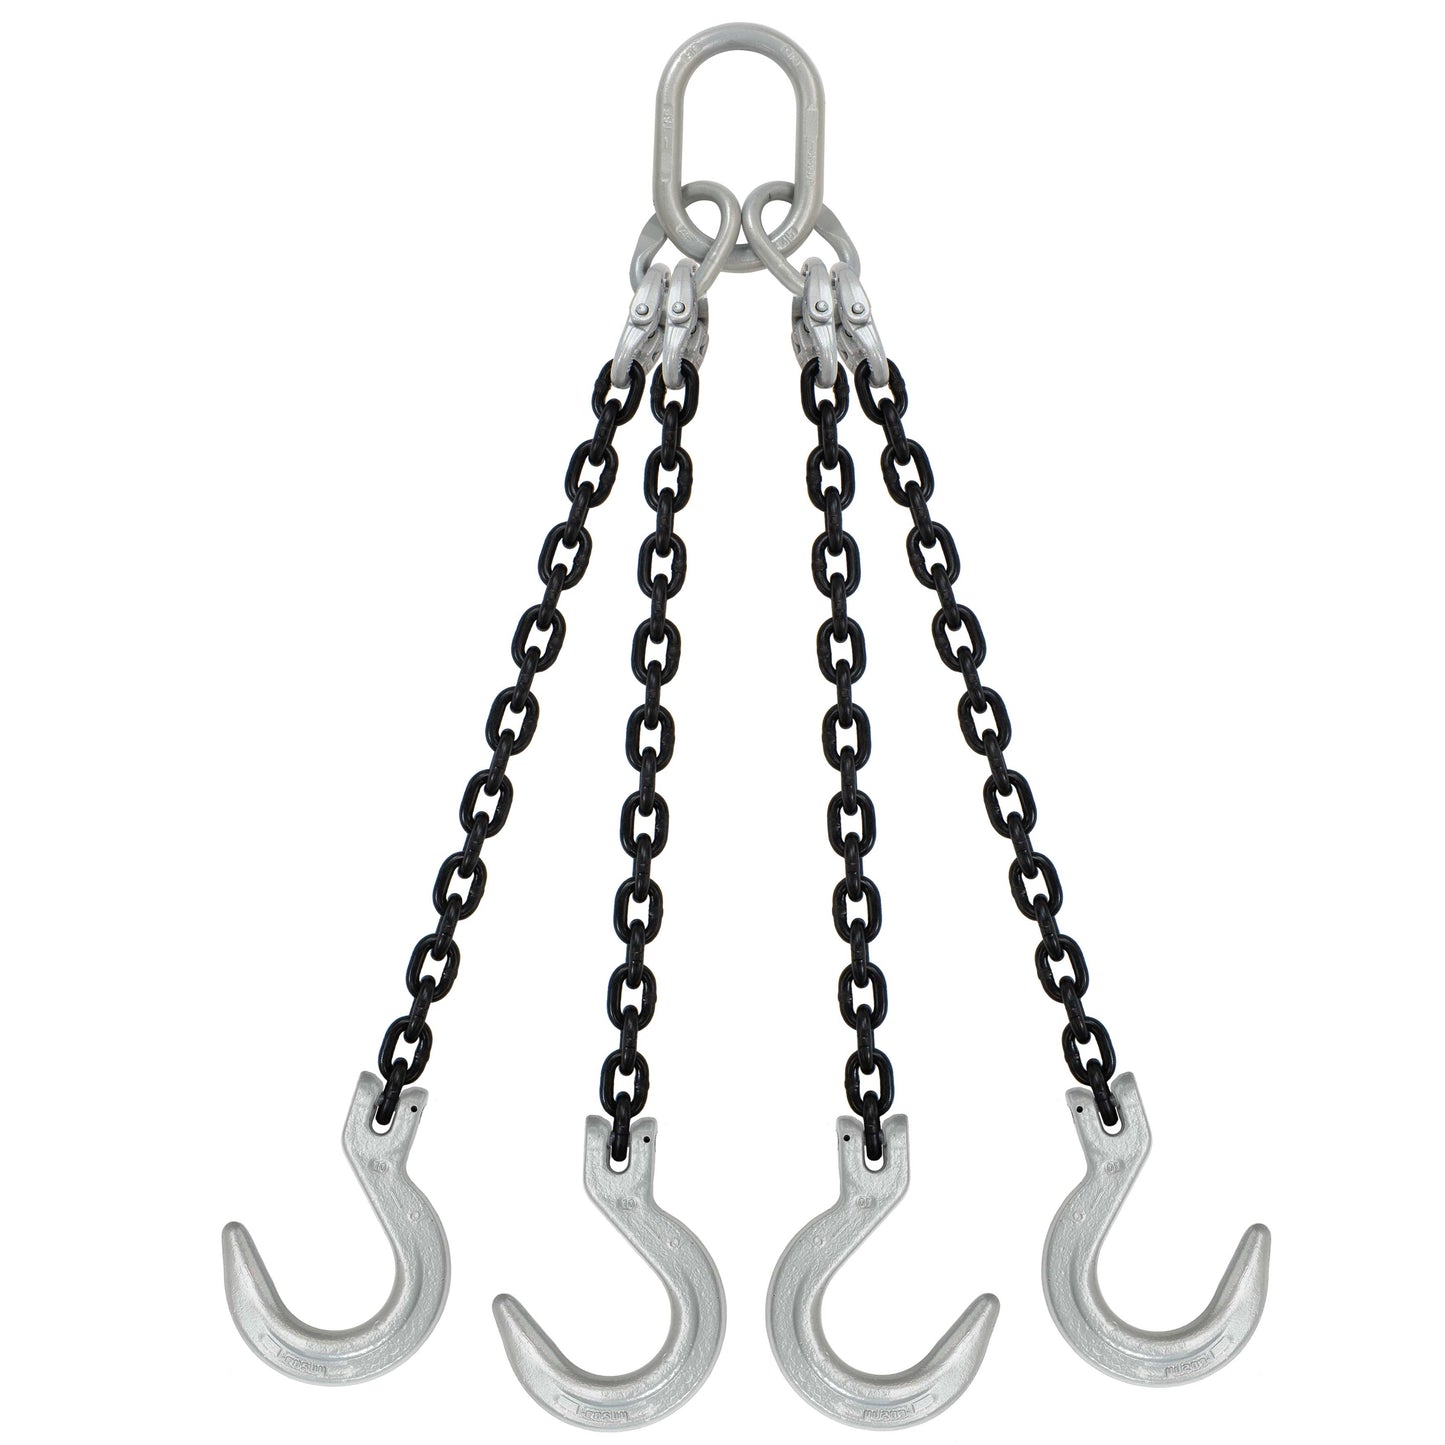 12 inch x 18 foot Domestic 4 Leg Chain Sling w Crosby Foundry Hooks Grade 100 image 1 of 2